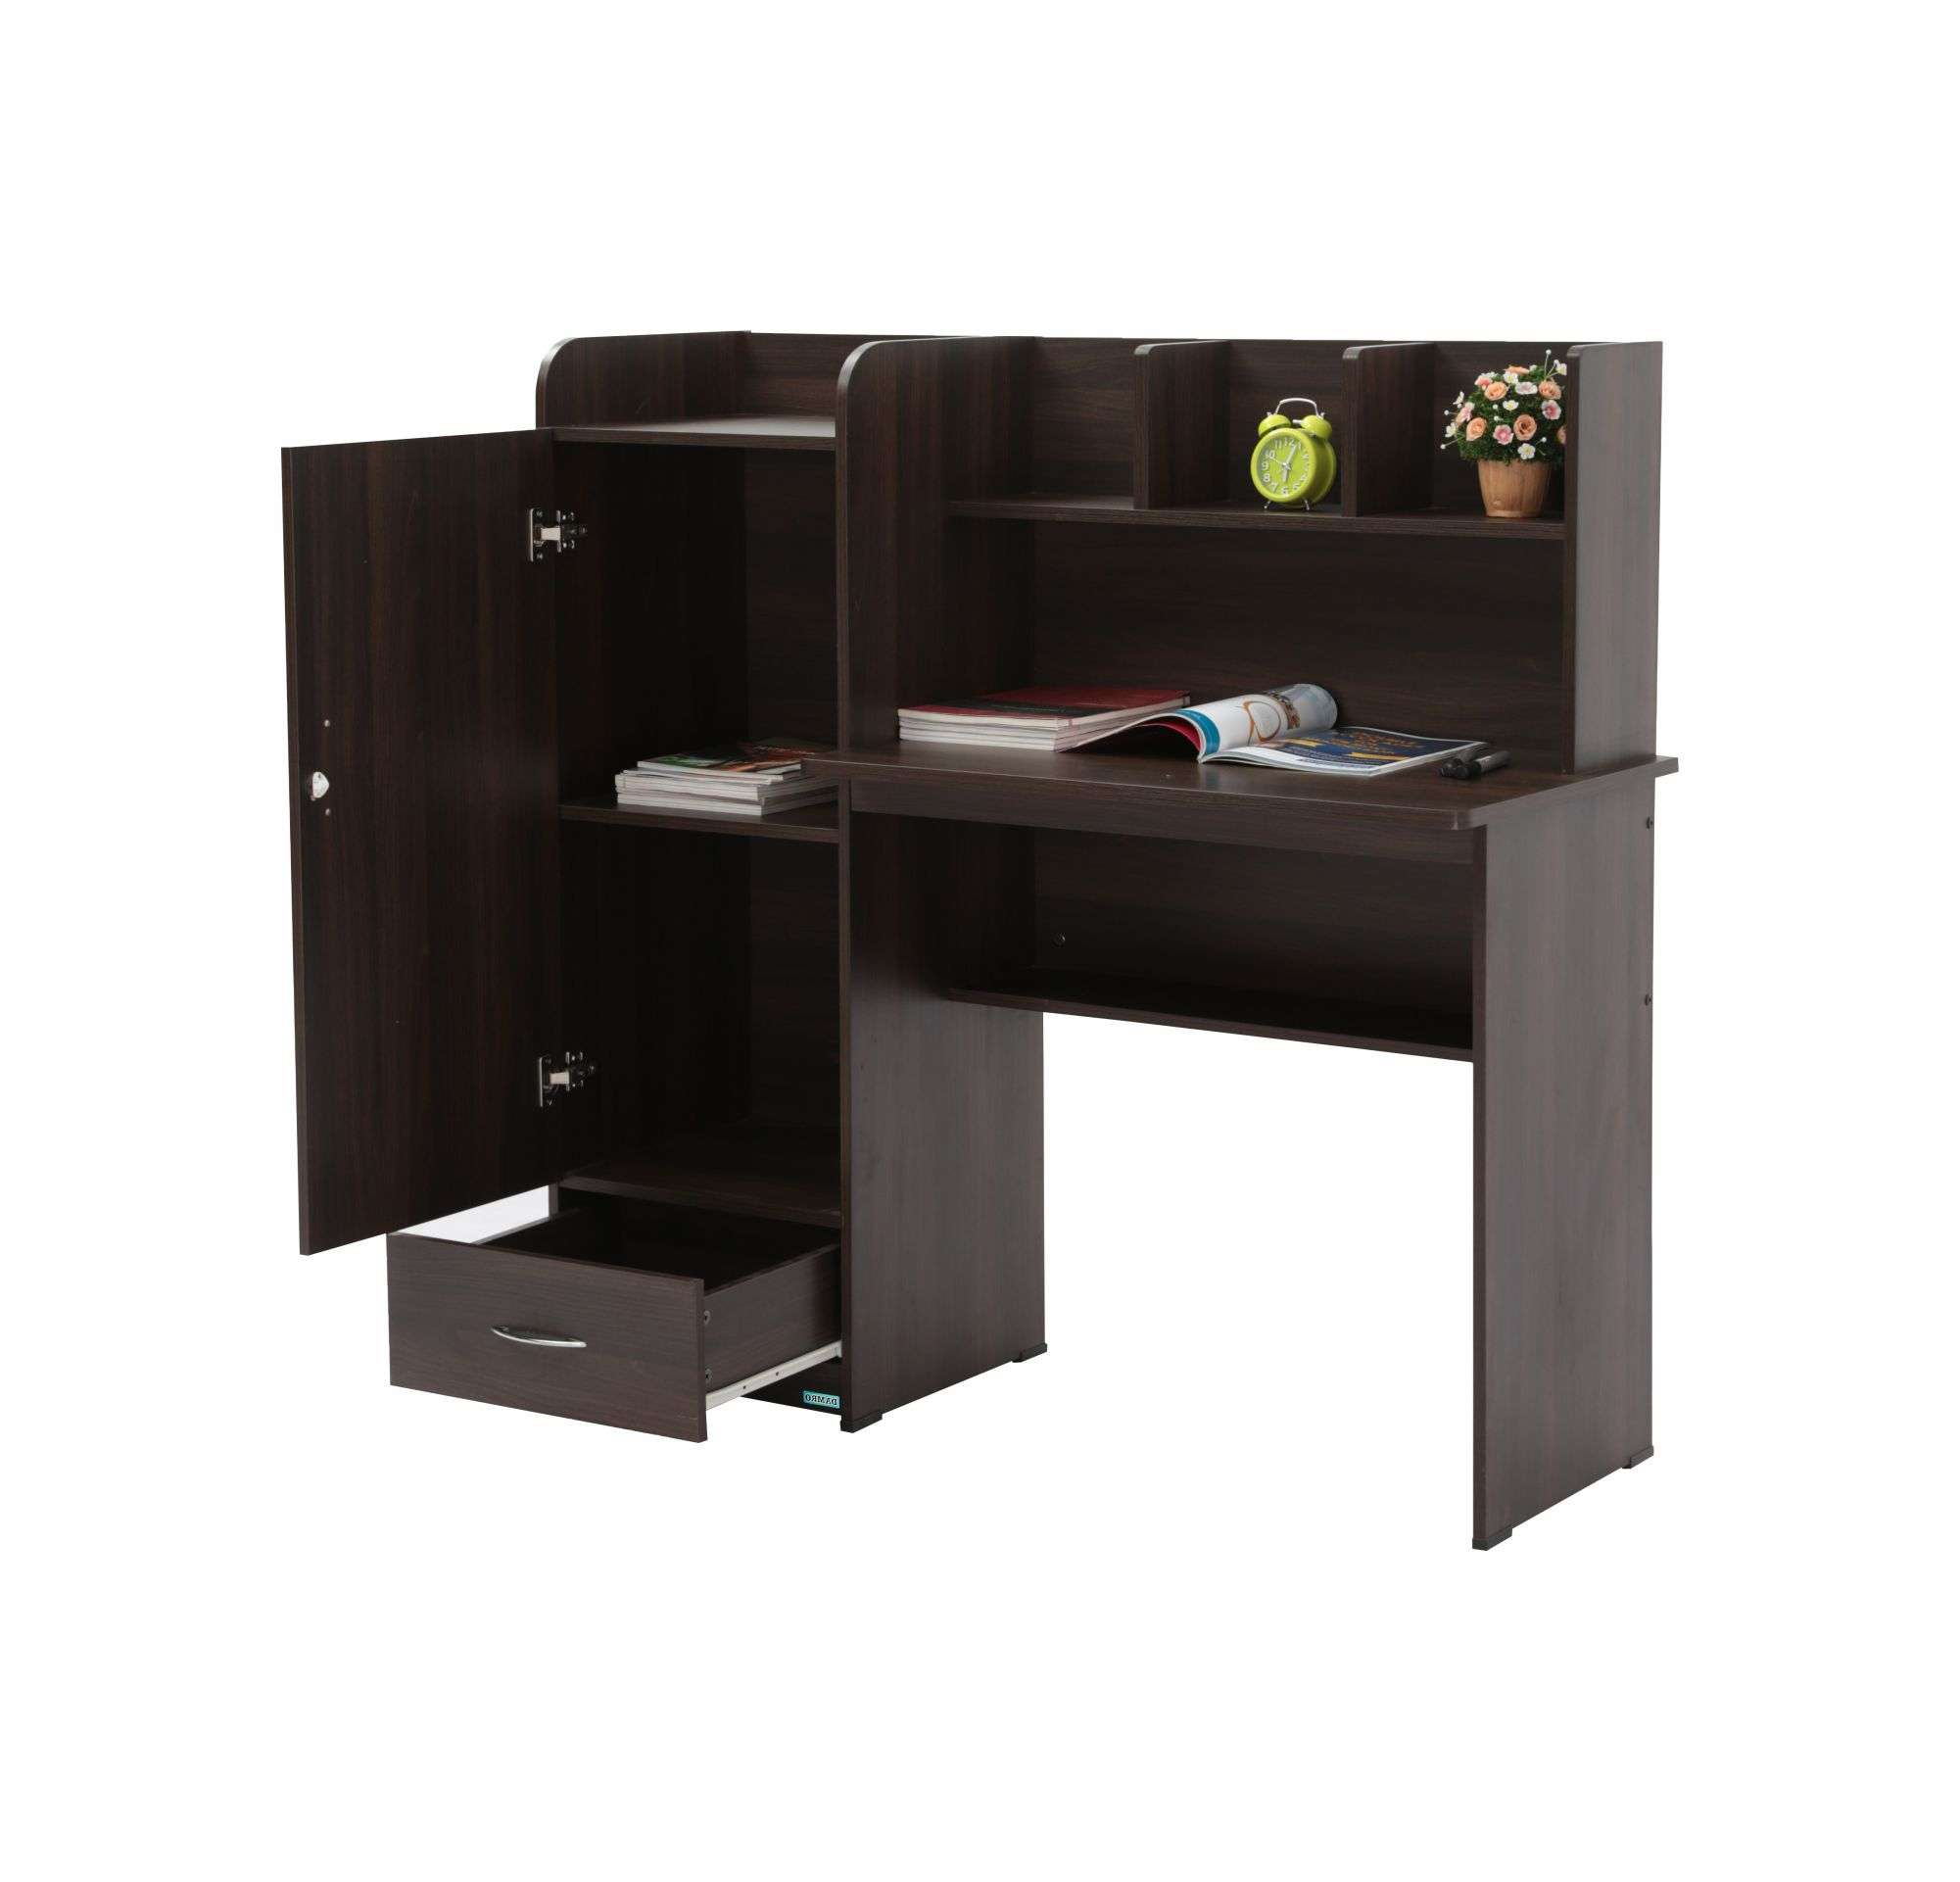 KSD003-Study Desk With Cupboard & Drawers-M42